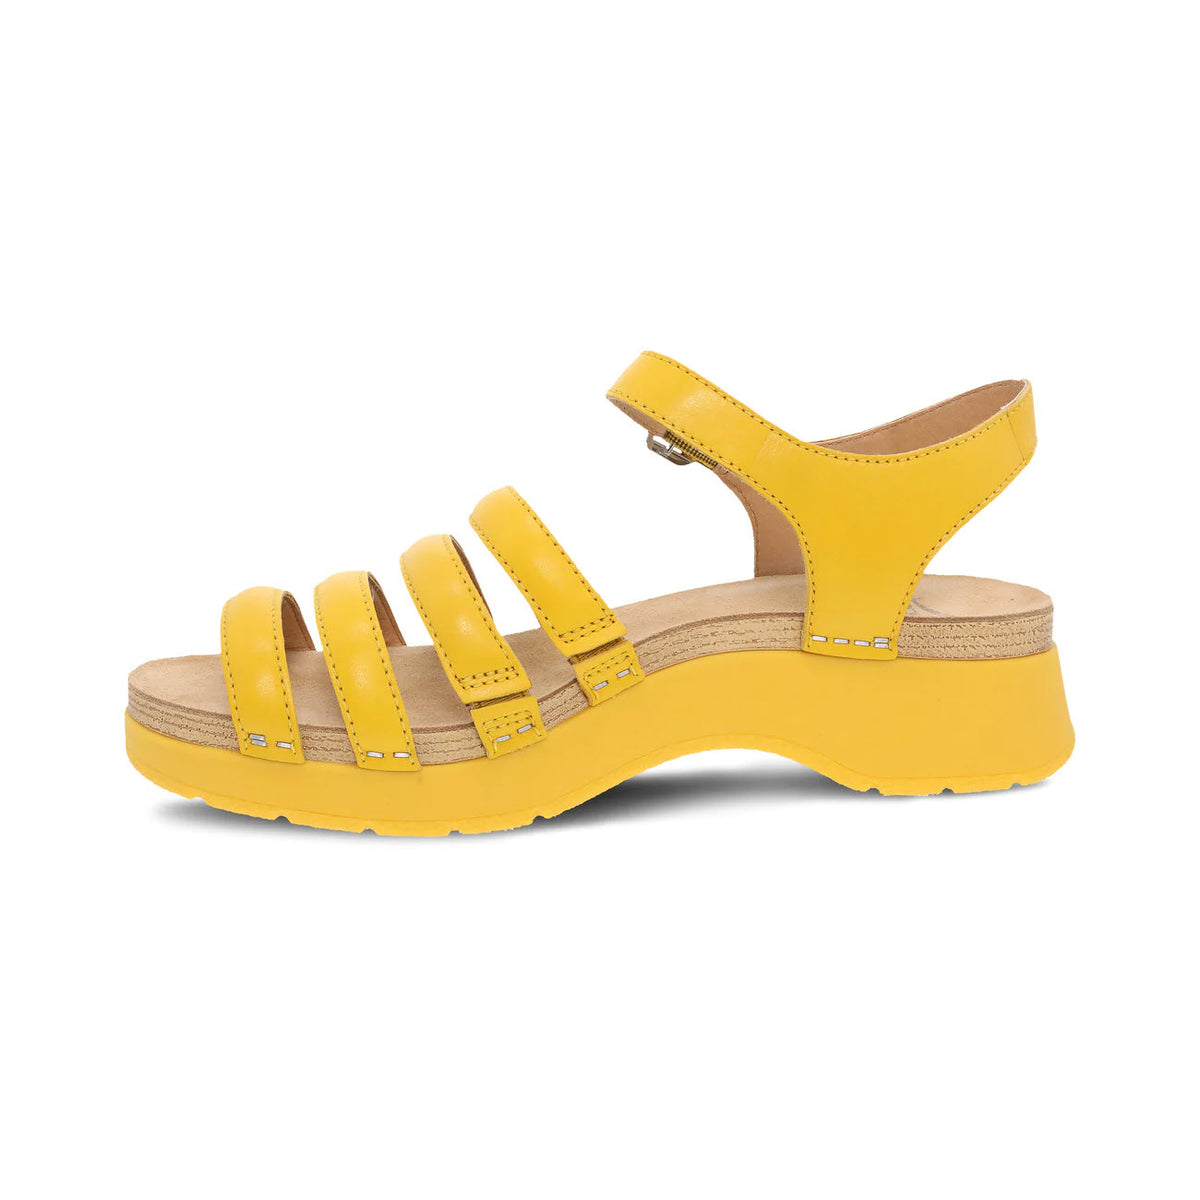 Dansko Roxie Yellow strappy sandal with a chunky sole on a white background.